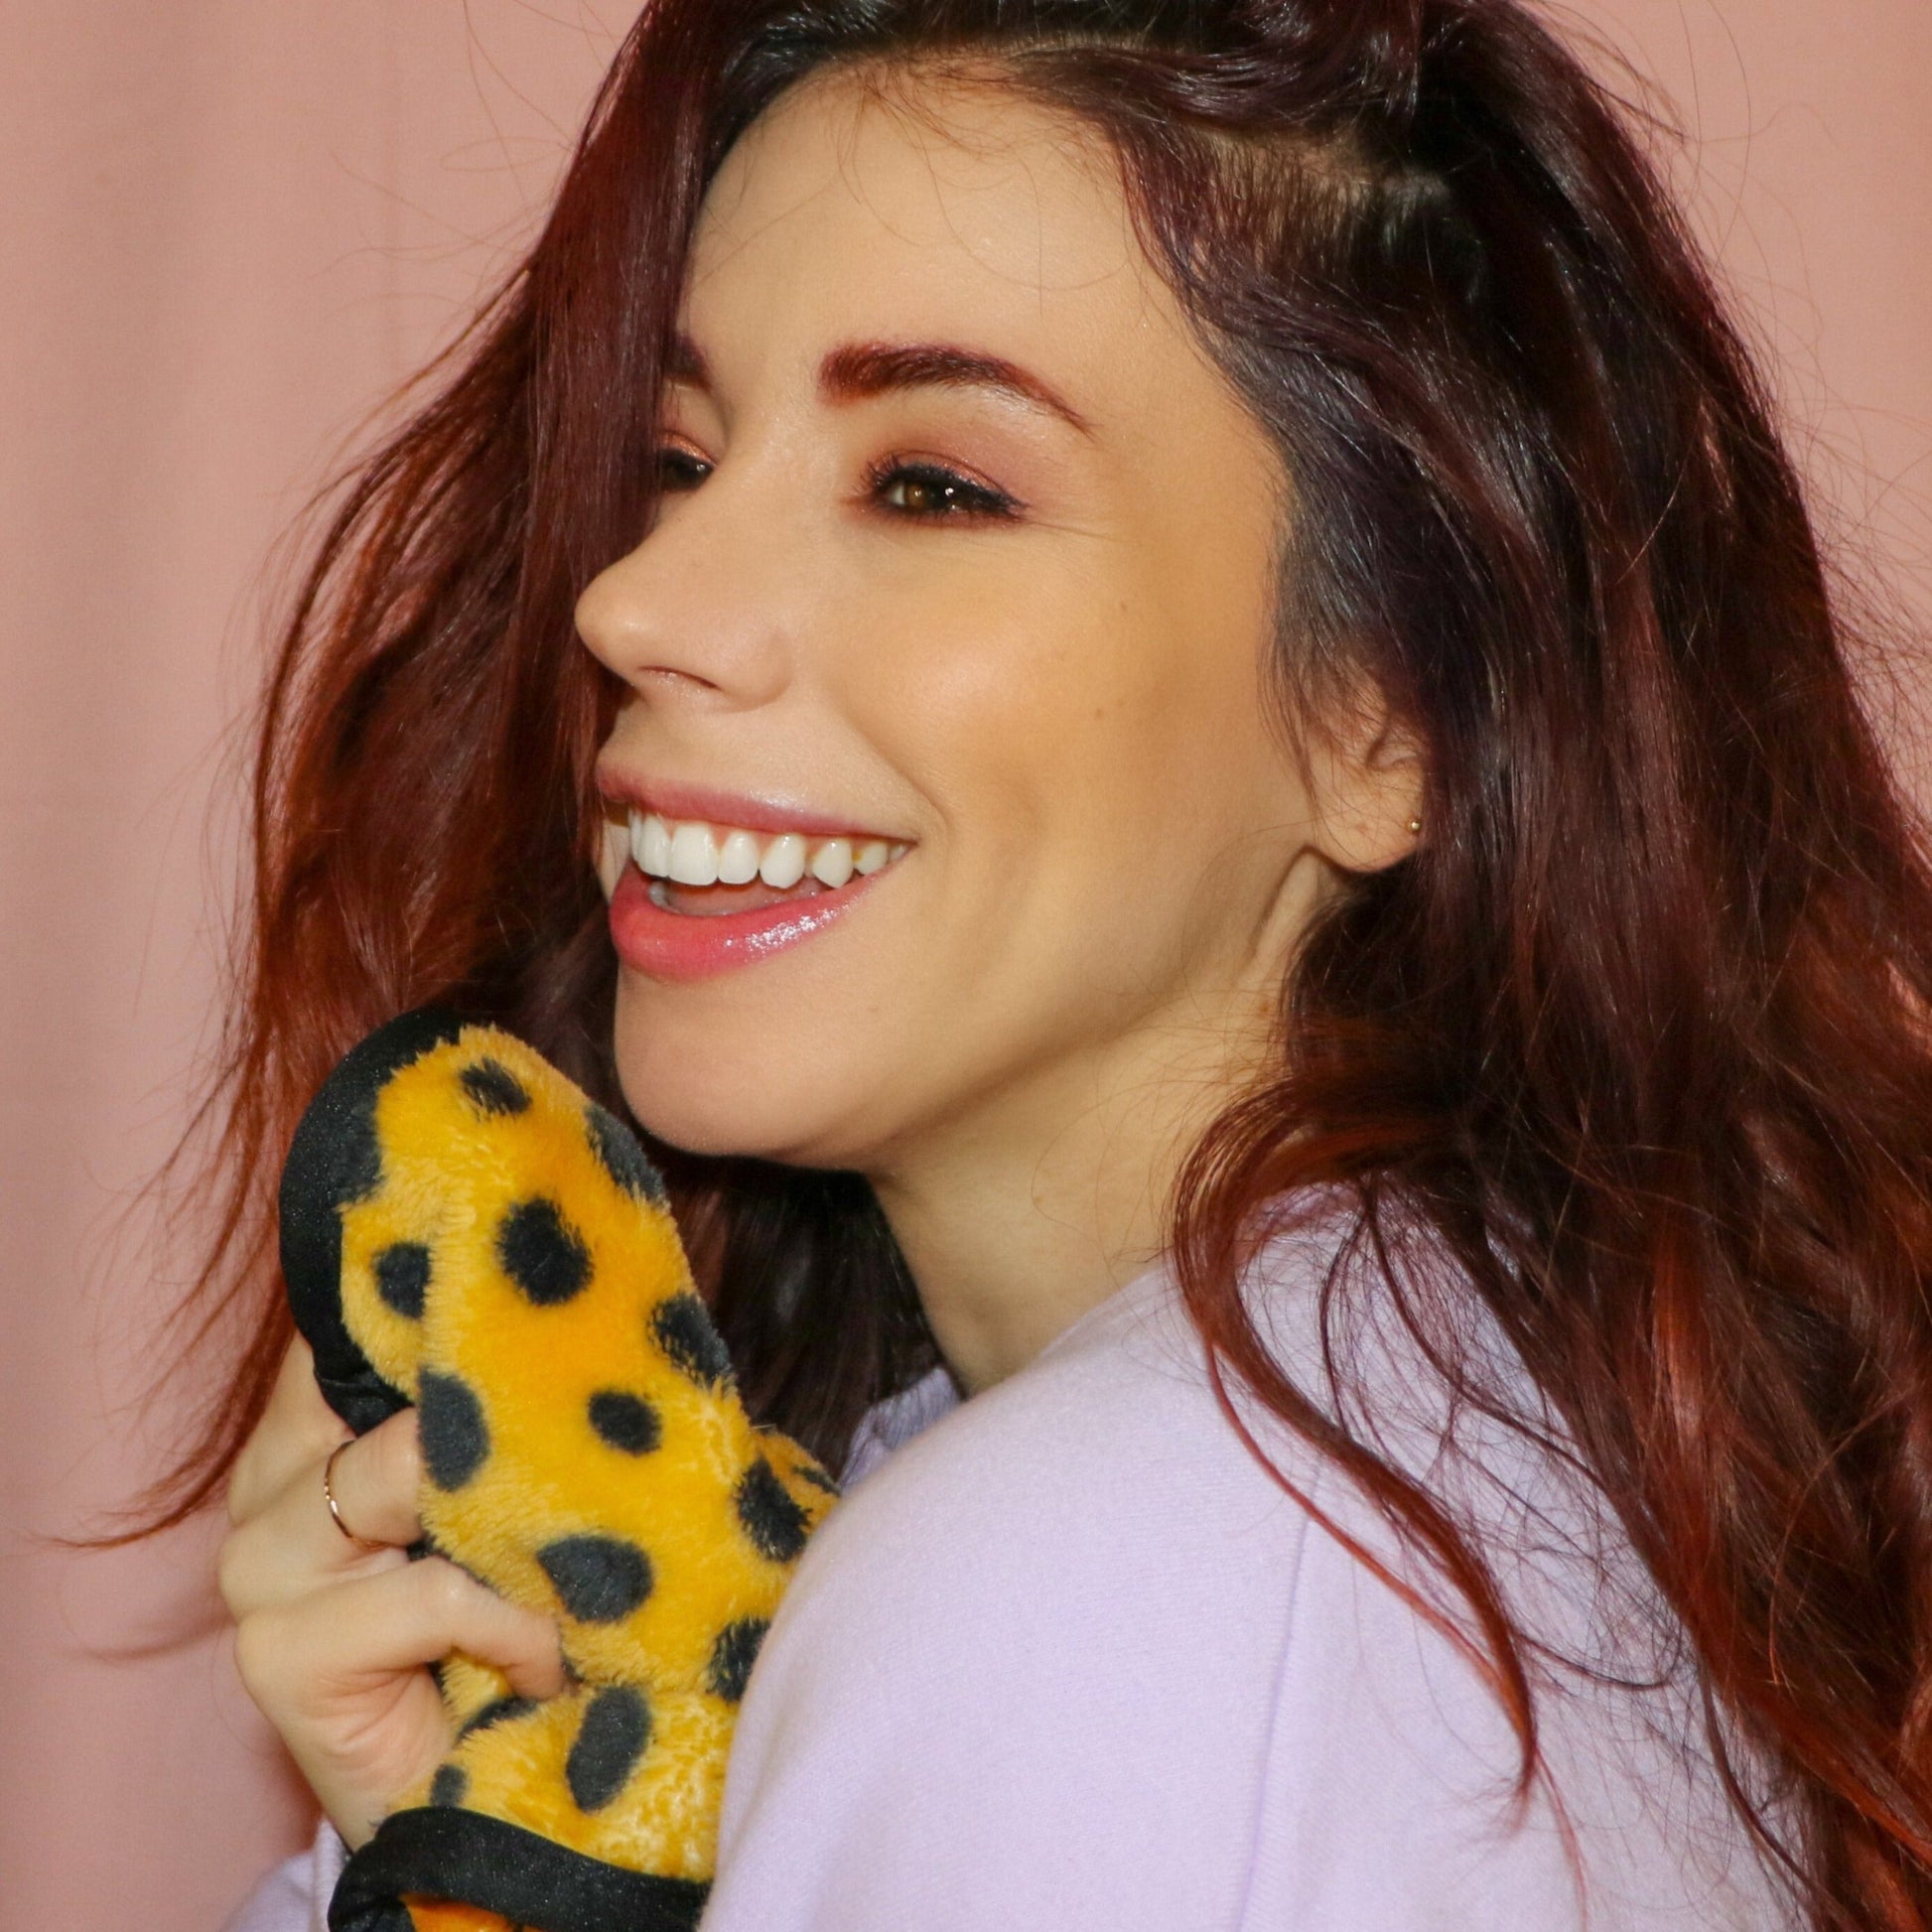 Woman smiling and holding up Cheetah Print MakeUp Eraser to her face.